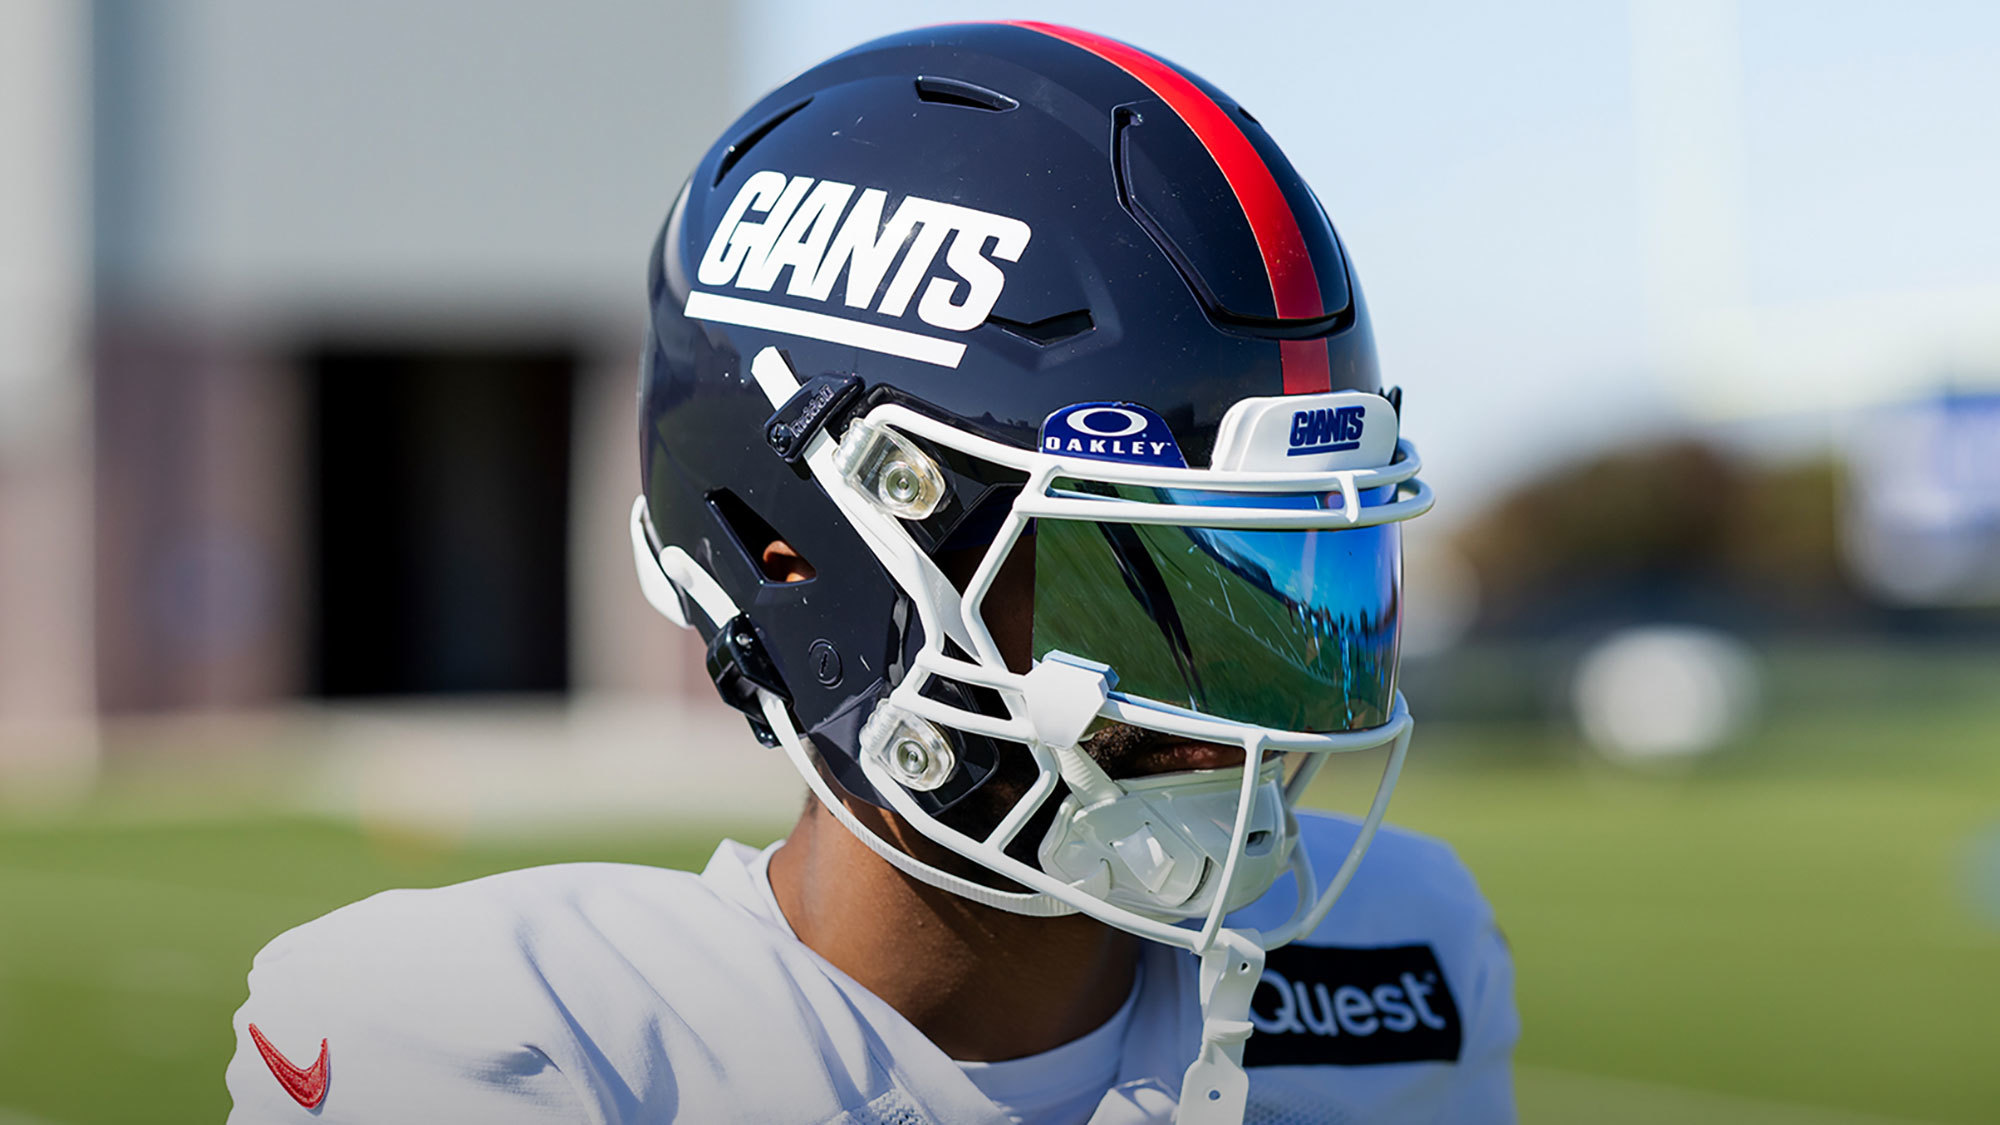 A look at the Giants' helmet for Sunday night's game.